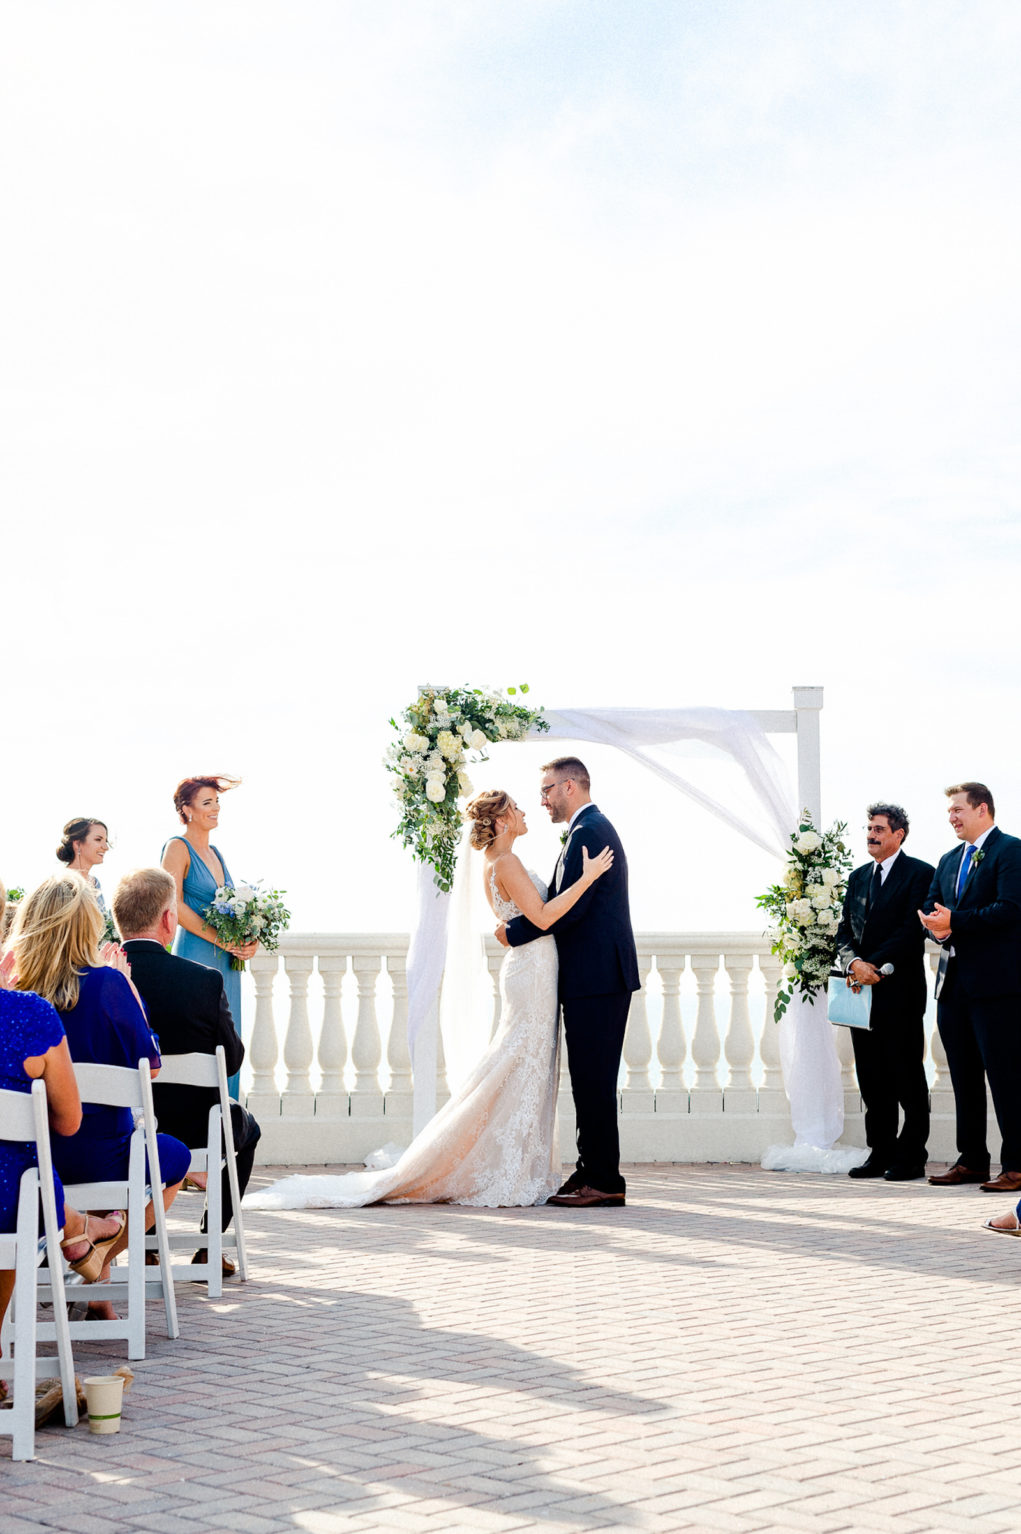 Bride and Groom at Waterfront Wedding Ceremony | Dewitt for Love Photography